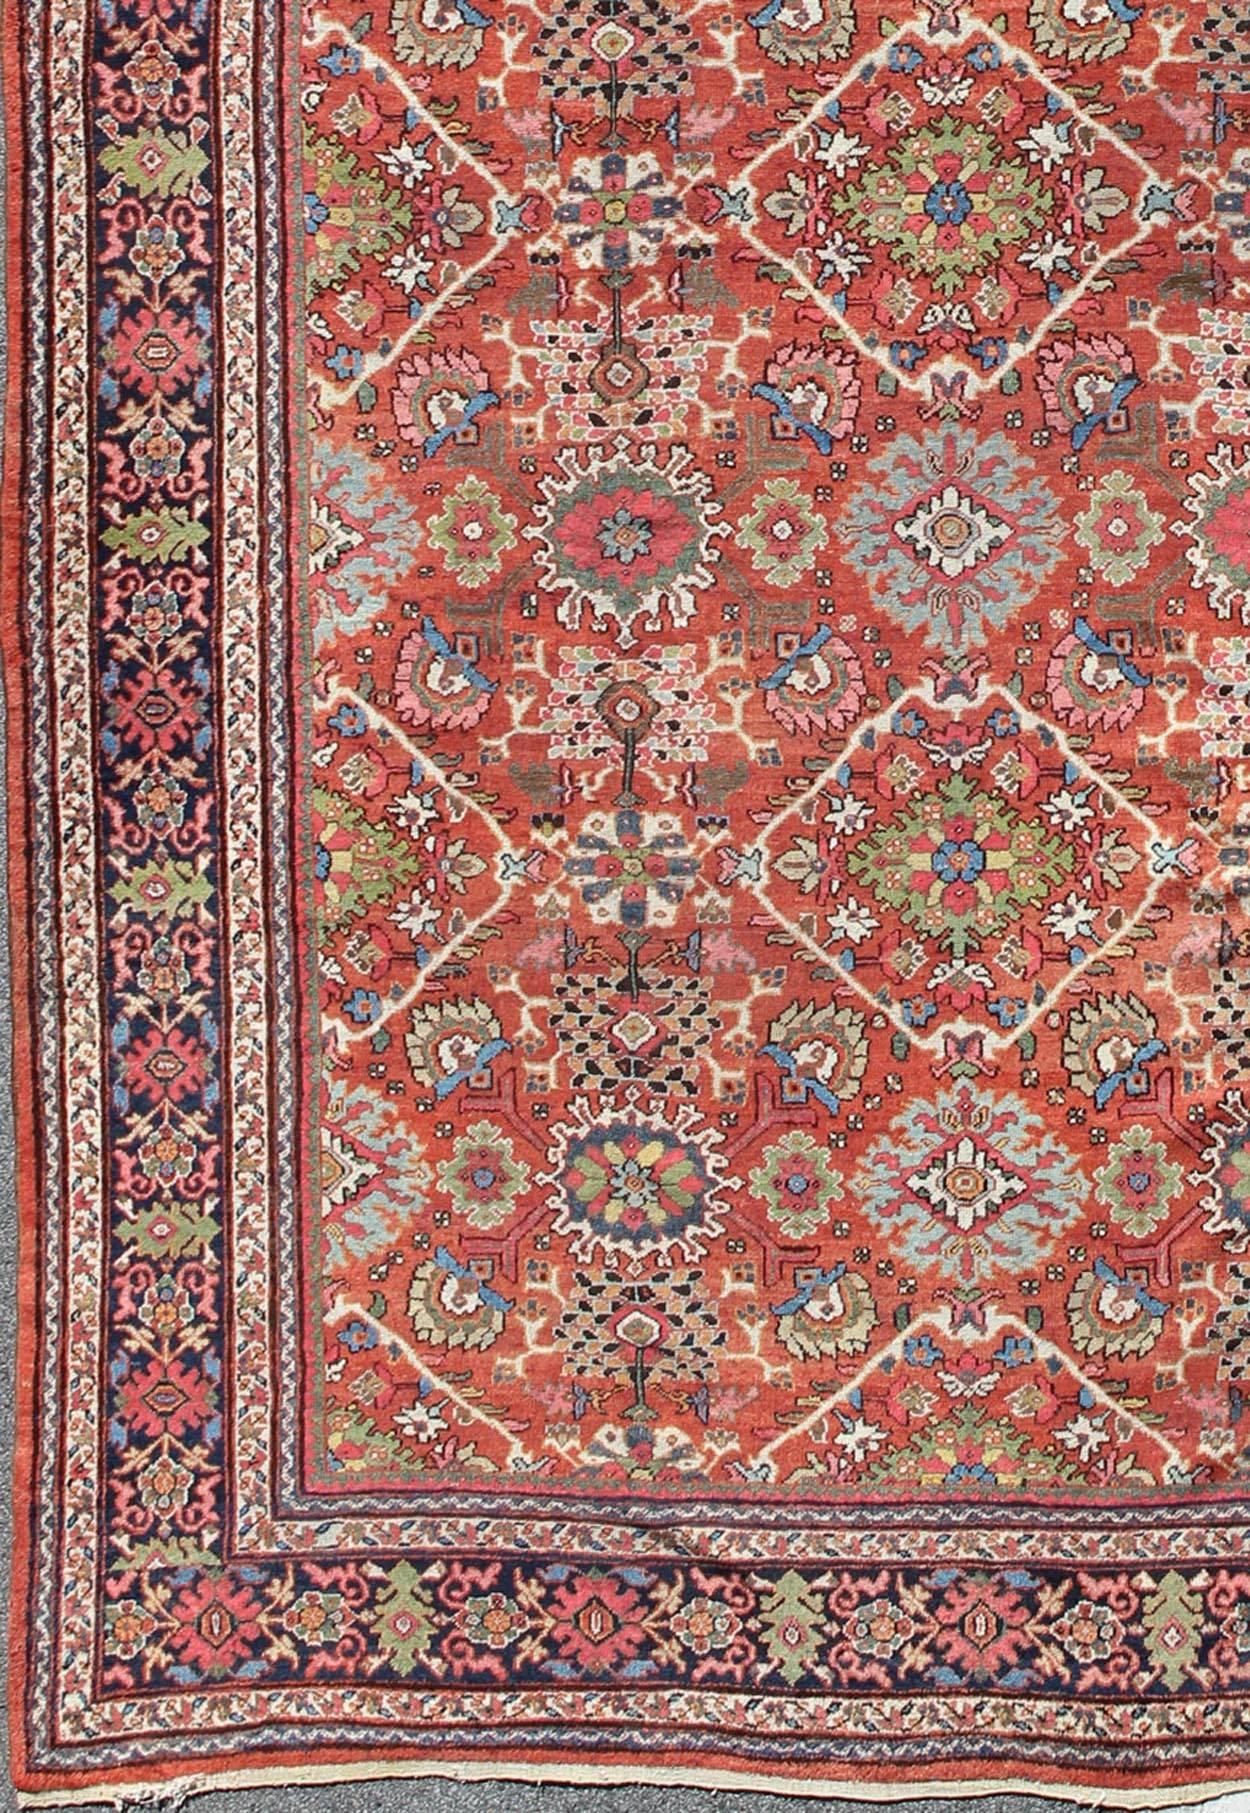 Antique Persian Sultanabad-Mahal Rug in Jewel Tones & All-Over Geometric Design. Antique Persian Sultanabad-Mahal Rug, Keivan Woven Arts / rug L11-1207, country of origin / type: Persian / Sultanabad, circa Early-20th Century.

Measures: 11' x